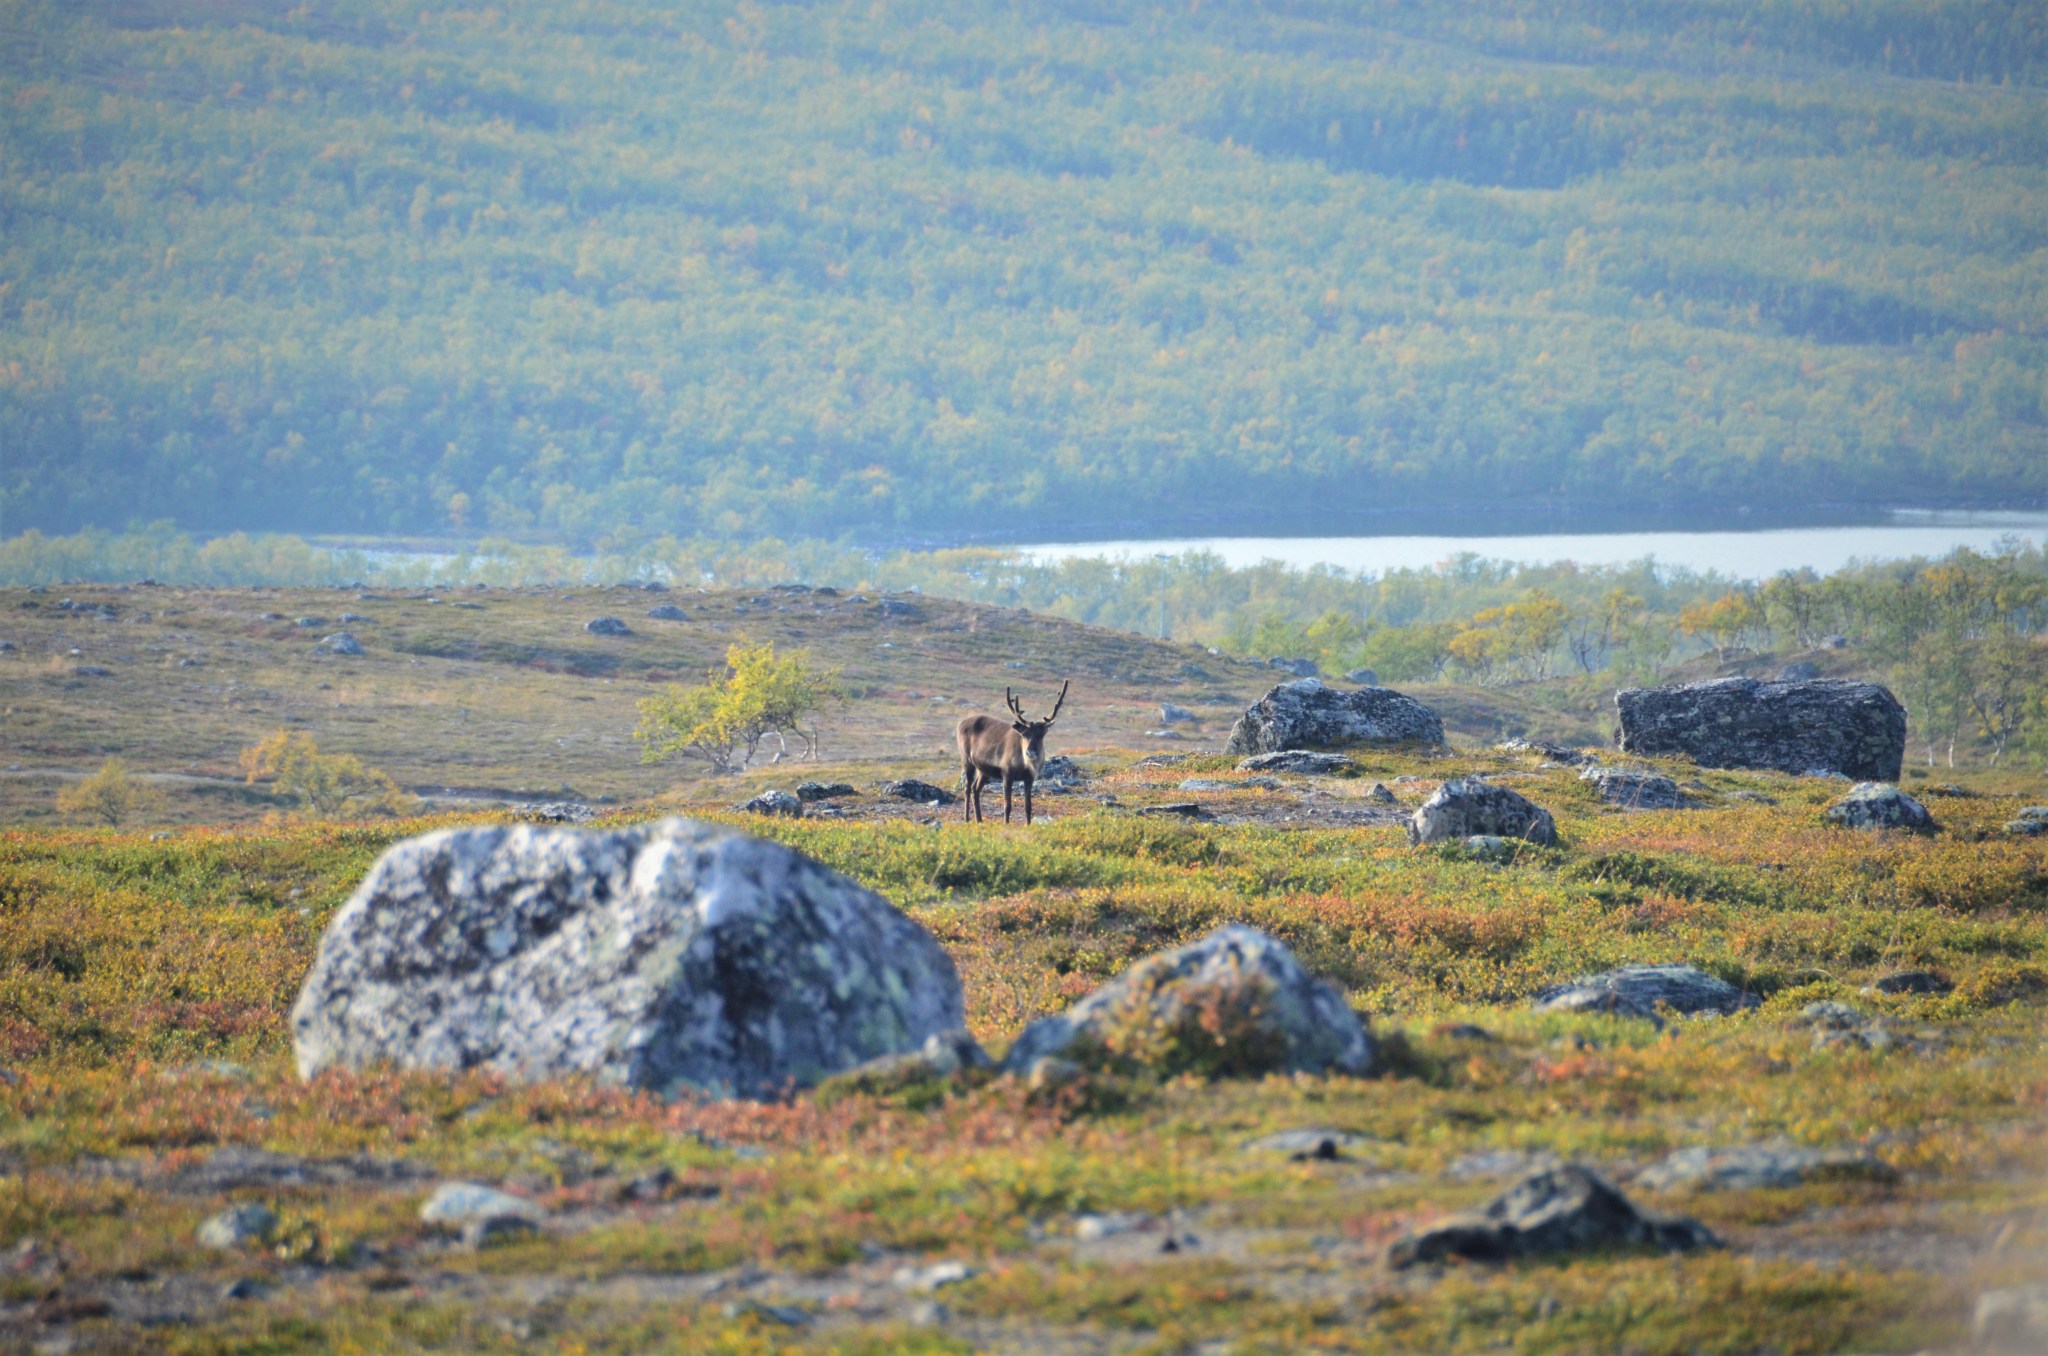 A reindeer in Arctic tundra. The reindeer is in the middle distance, looking toward the camera. The tundra is covered with scrubby vegetation in greens and oranges. Gray rocks dot the landscape. 